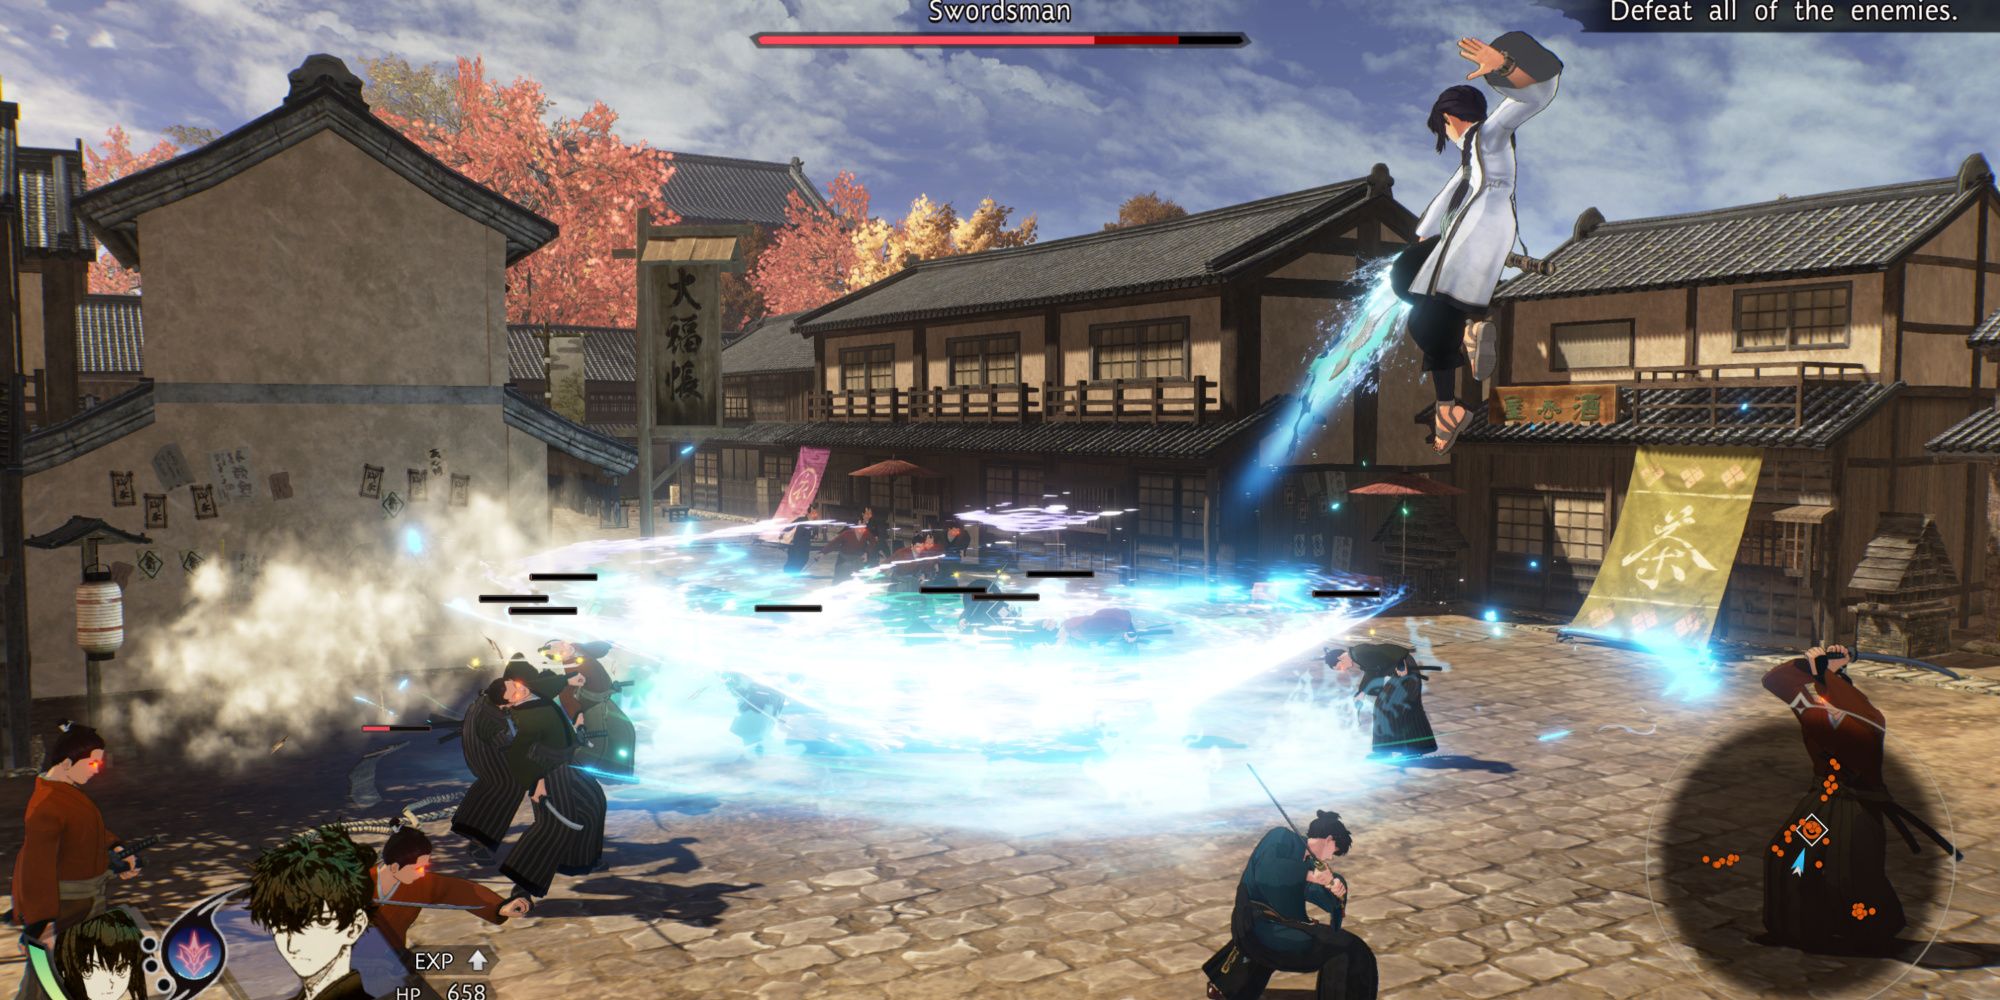 Fighting enemies with Saber in Fate:Samurai Remnant